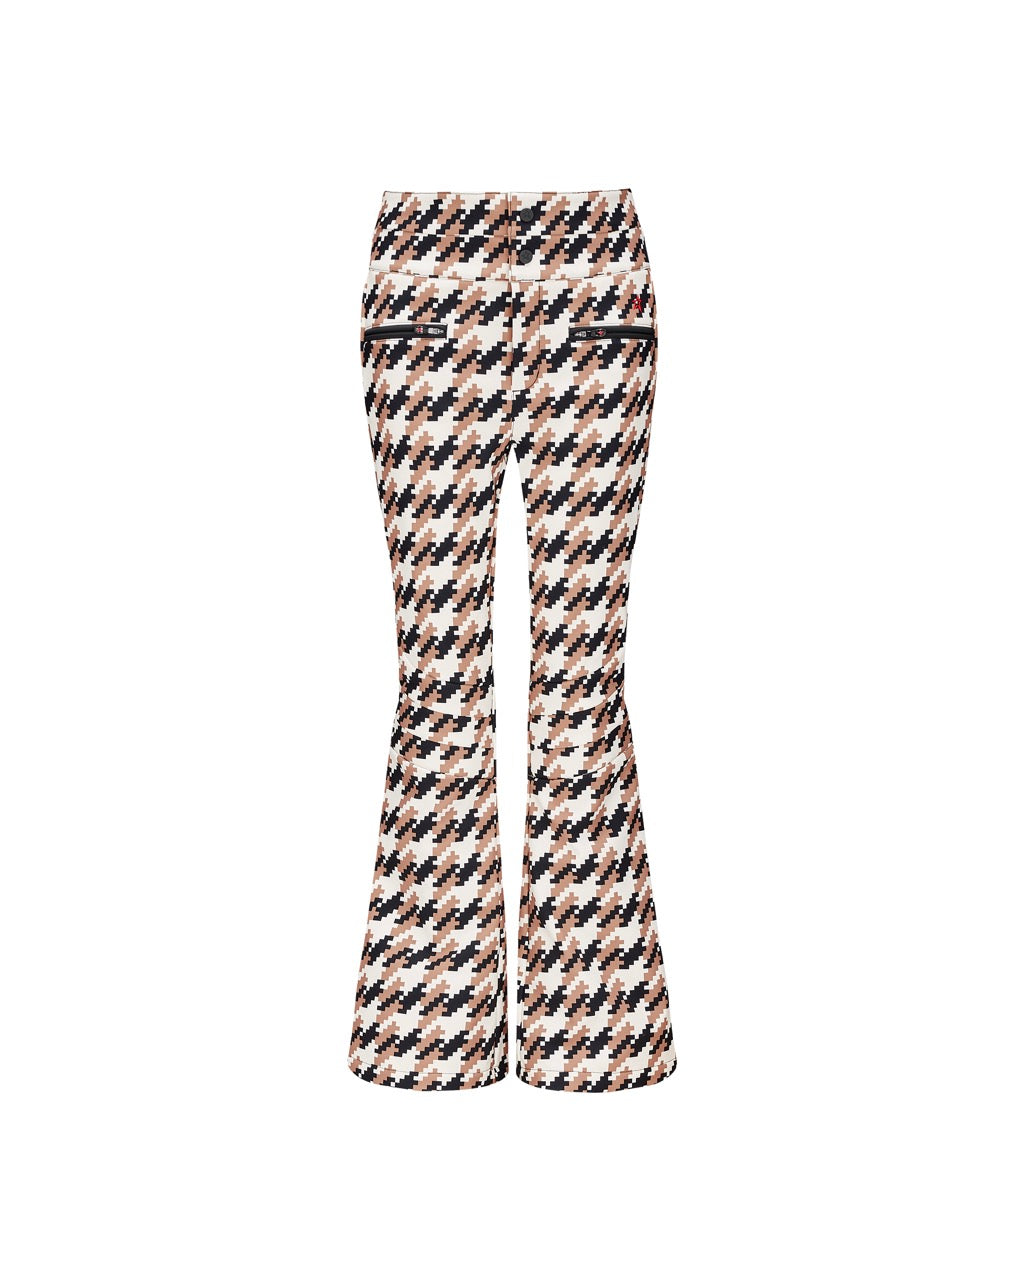 Perfect Moment Women's Houndstooth Aurora High Waist Flare Pant - Camel